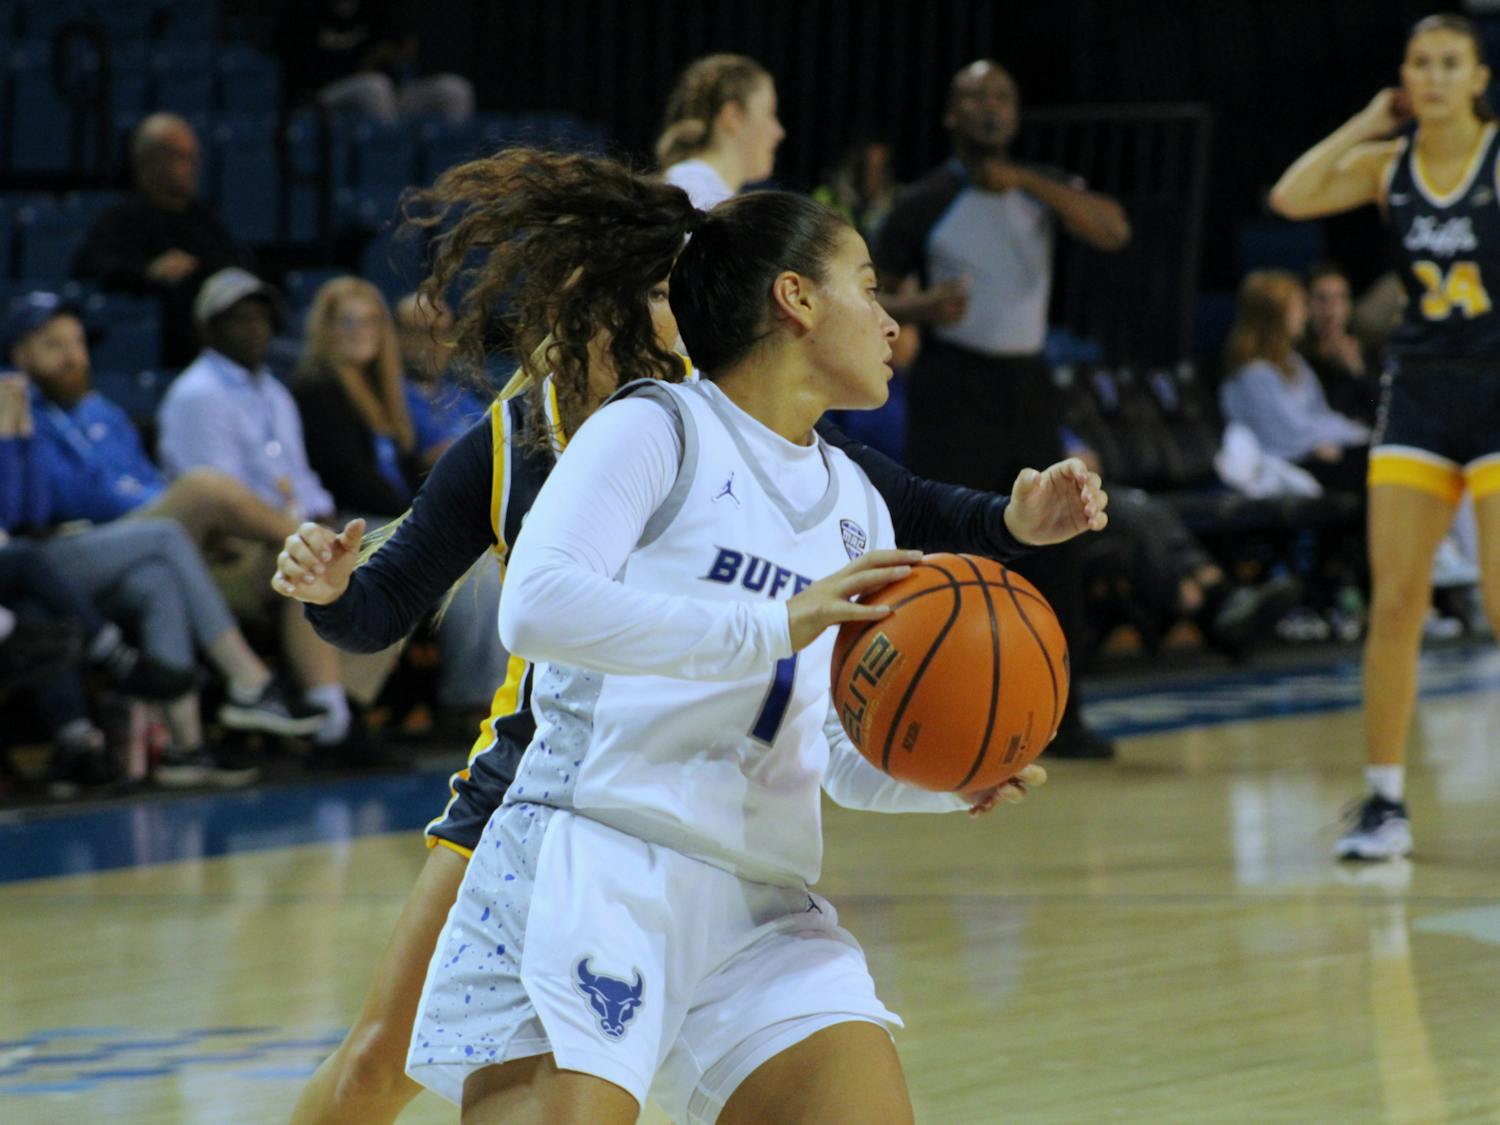 Senior guard Rana Elhusseini, pictured above at the Bulls' opening game, racked up 11 points during Saturday's game, putting her just behind freshman guard Kirsten Lewis-Williams, who scored 13.&nbsp;